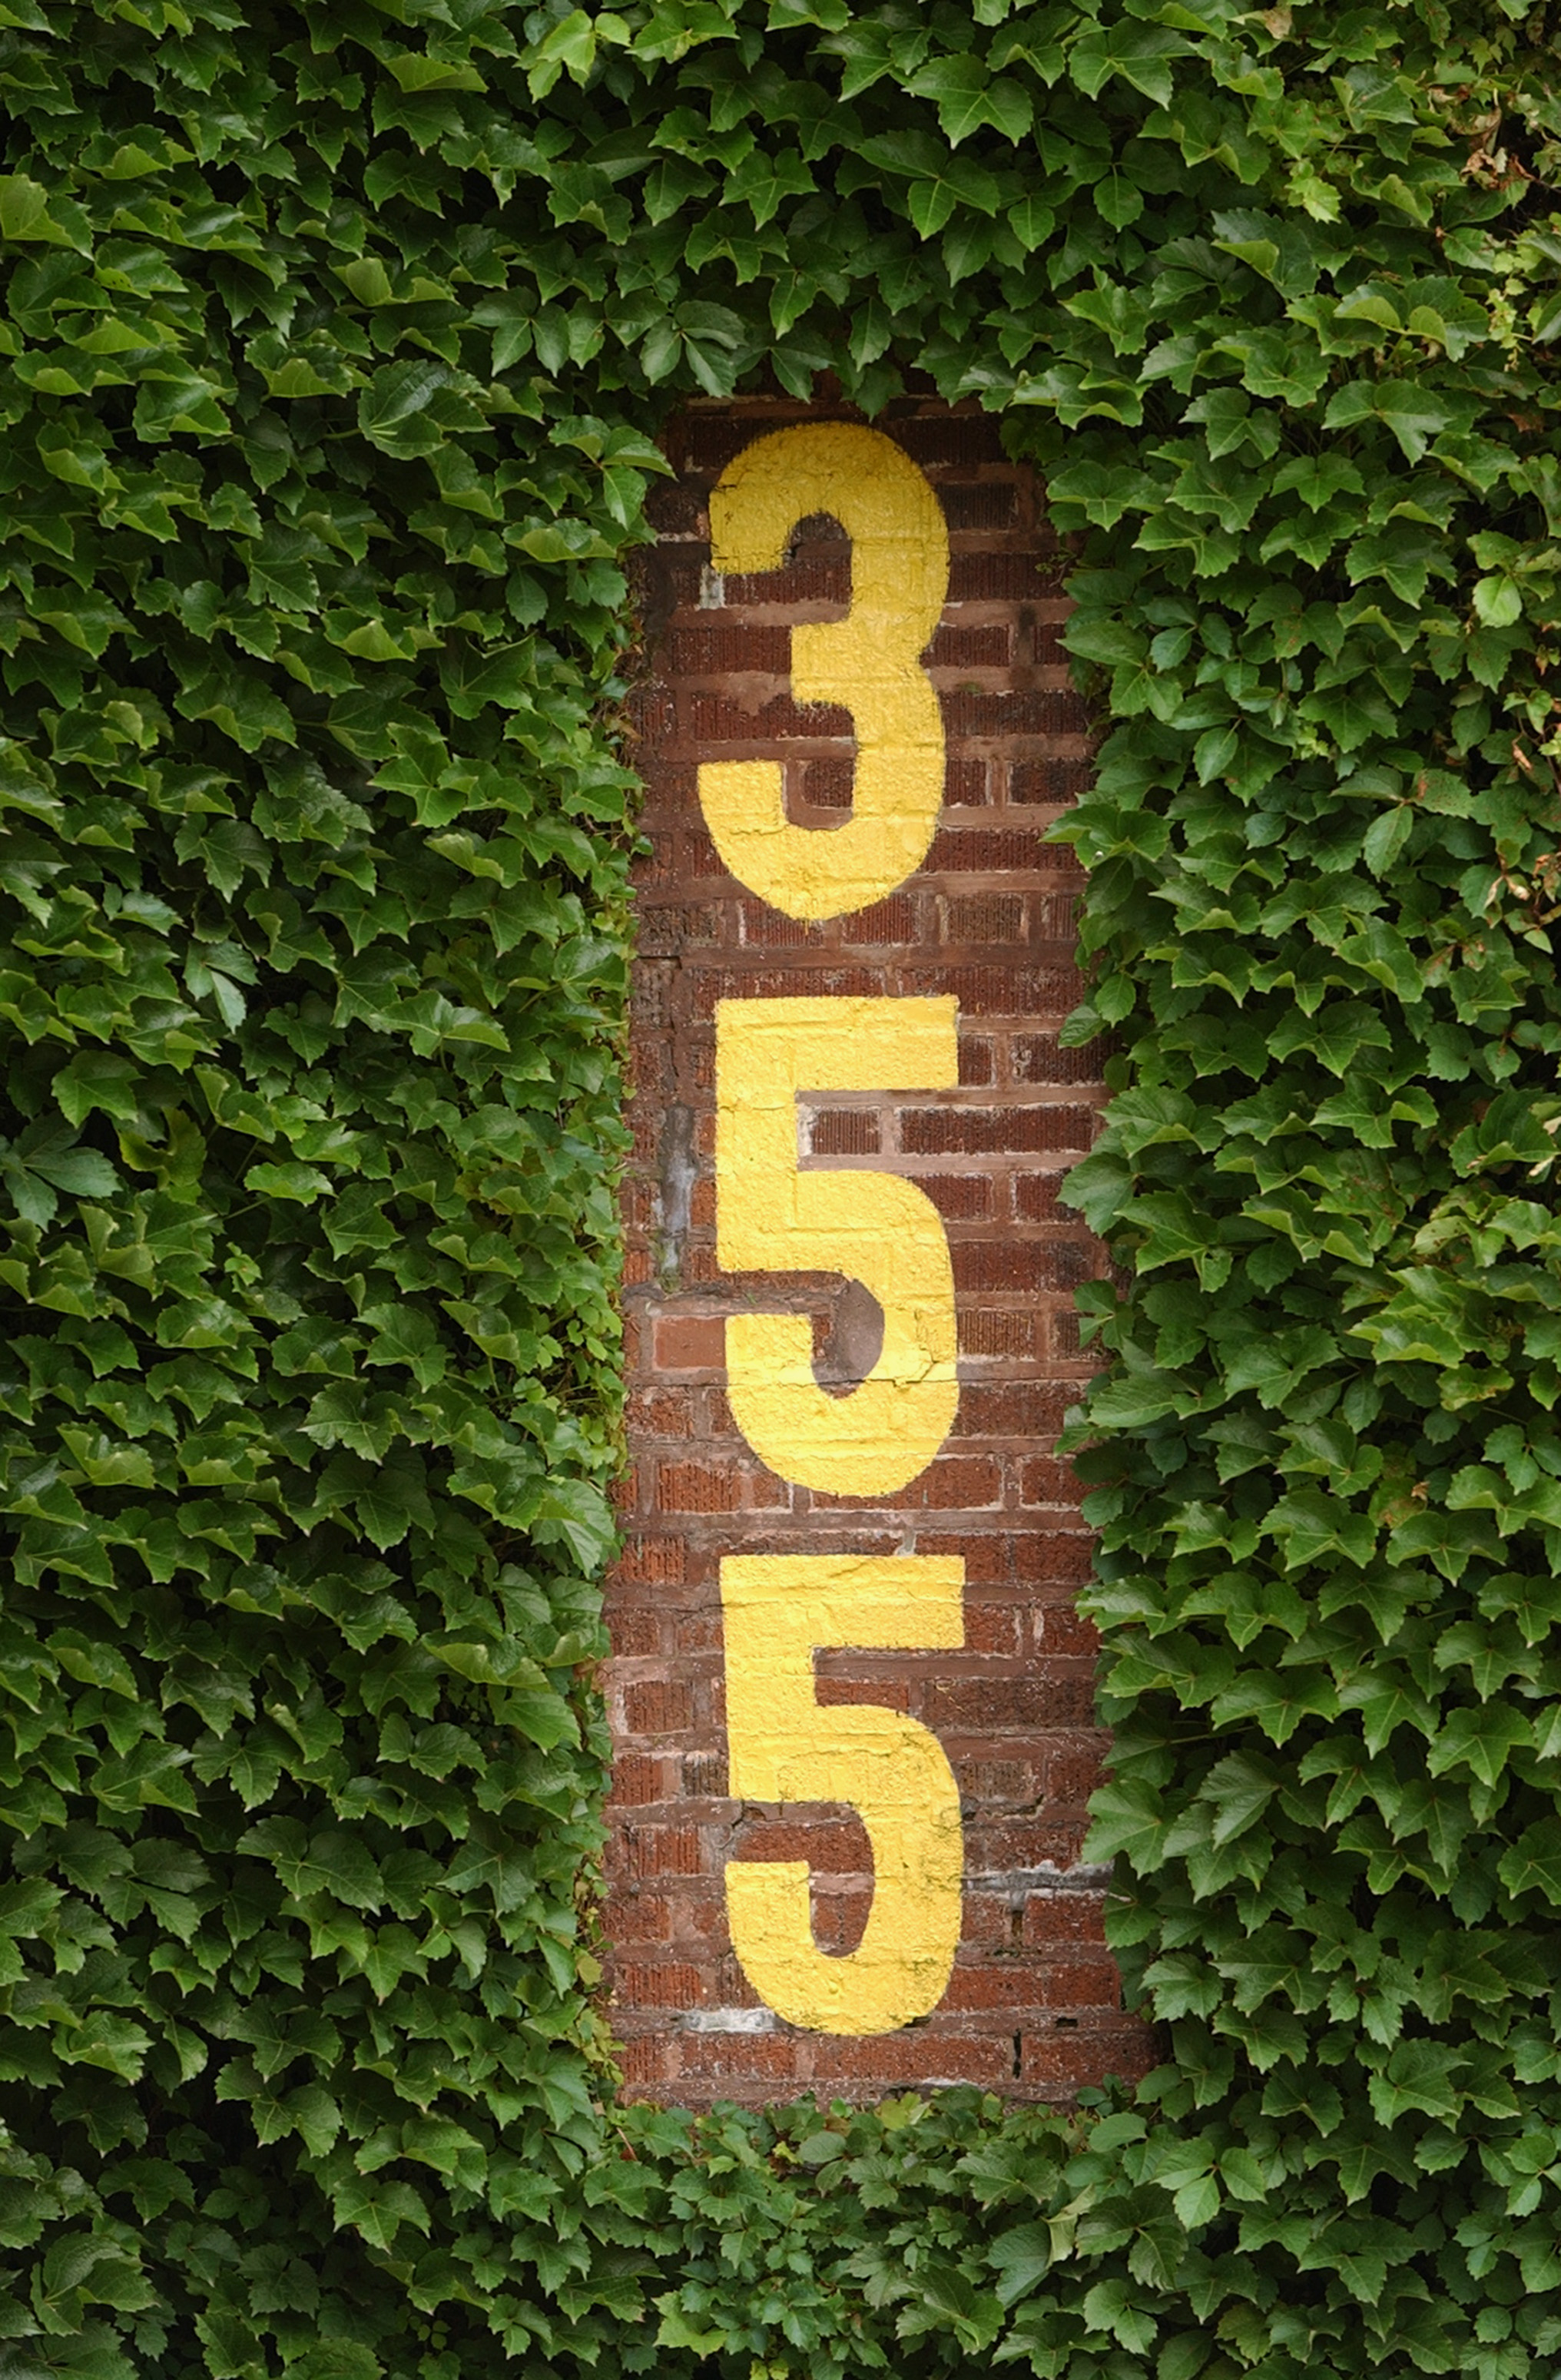 CHICAGO - JUNE 15:  A closeup view of the distance number (355 feet from home plate) and ivy covered leftfield wall at Wrigley Field on June 15, 2004 in Chicago, Illinois.  (Photo by Jonathan Daniel/Getty Images)